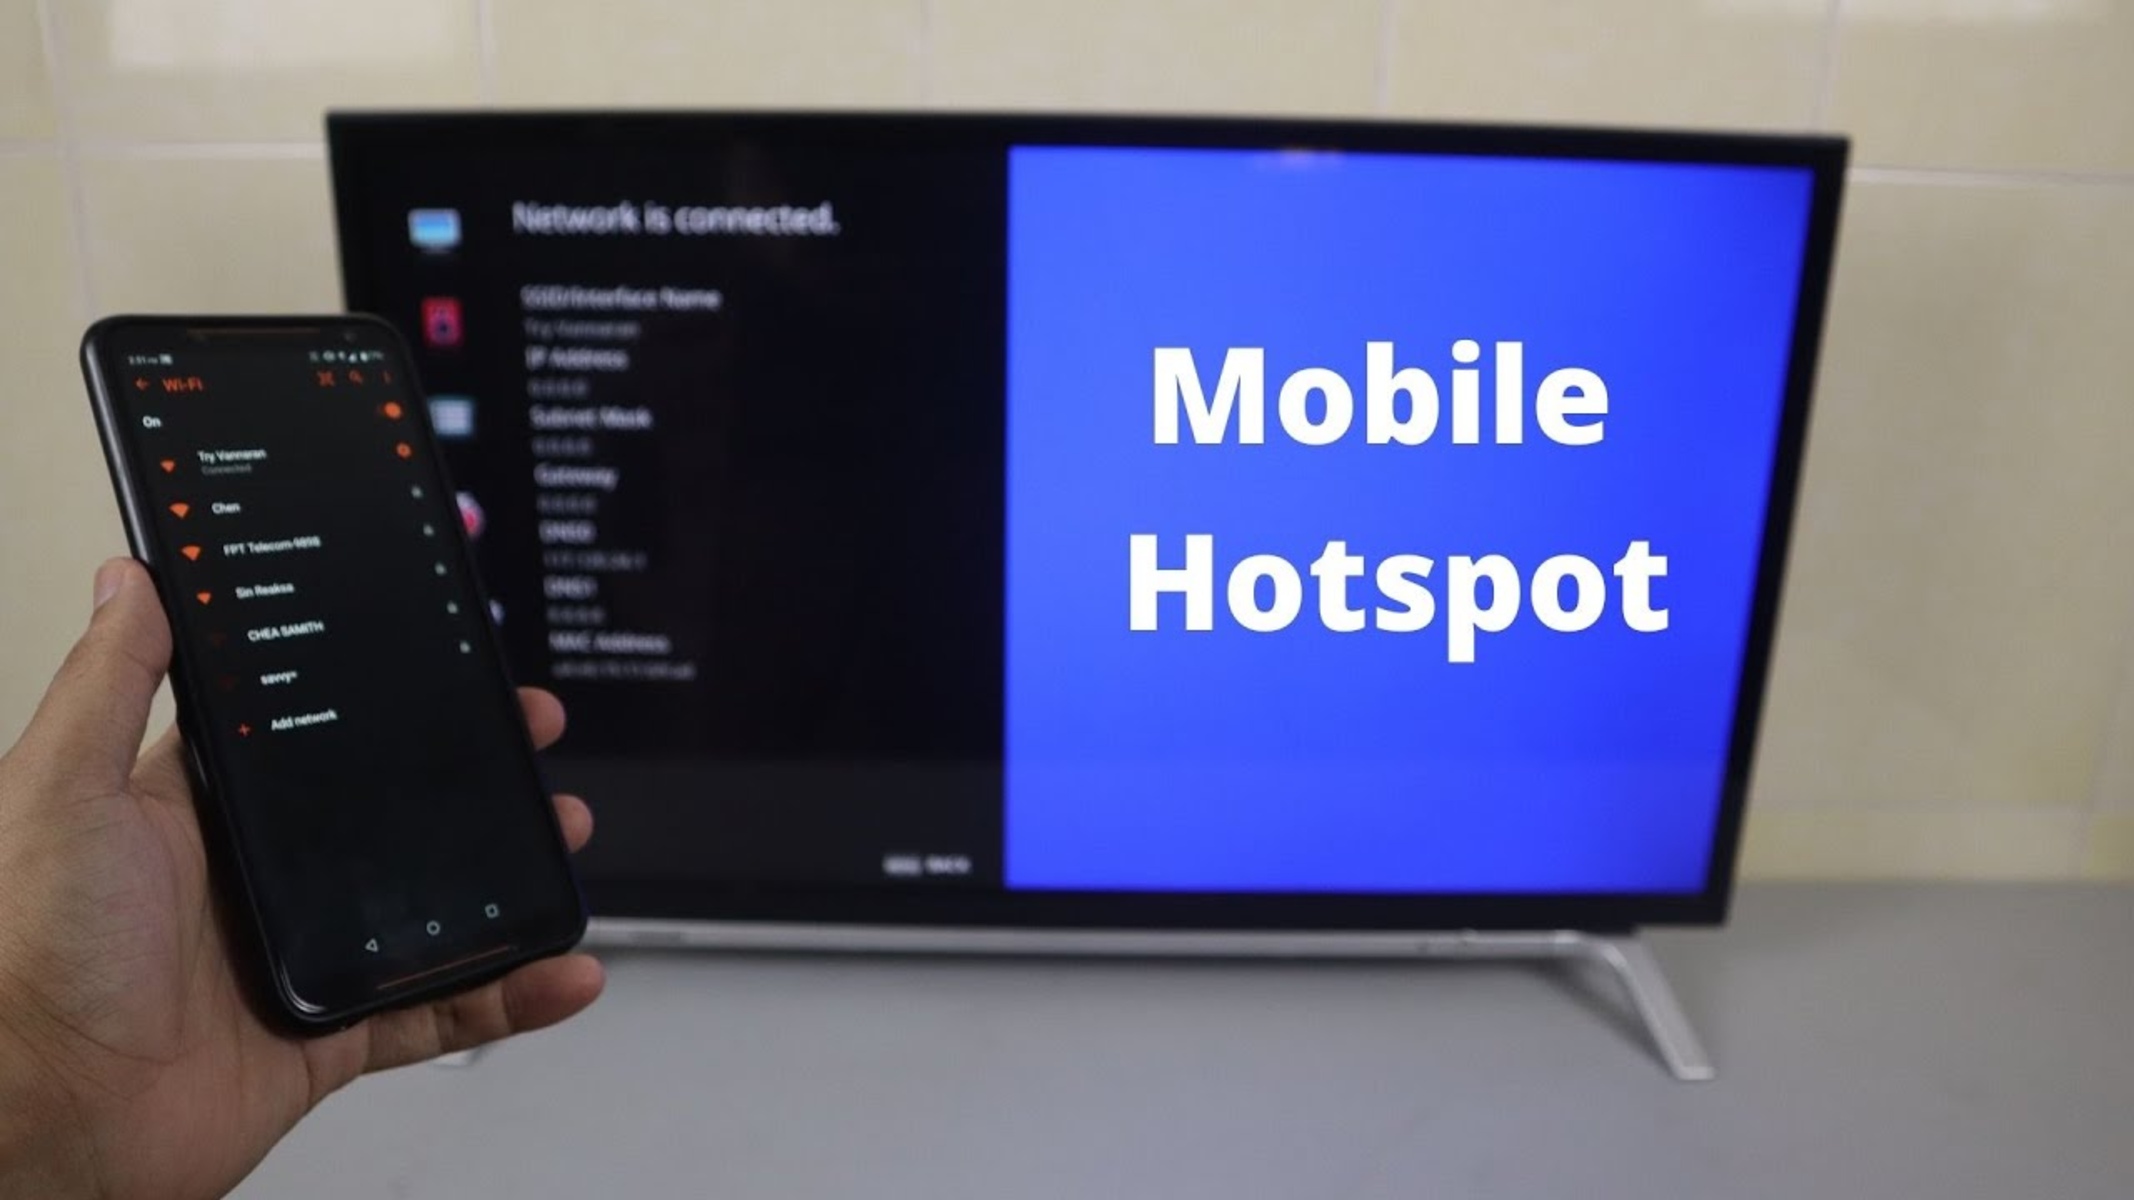 Smart TV Connection: Using IPhone Hotspot With Ease